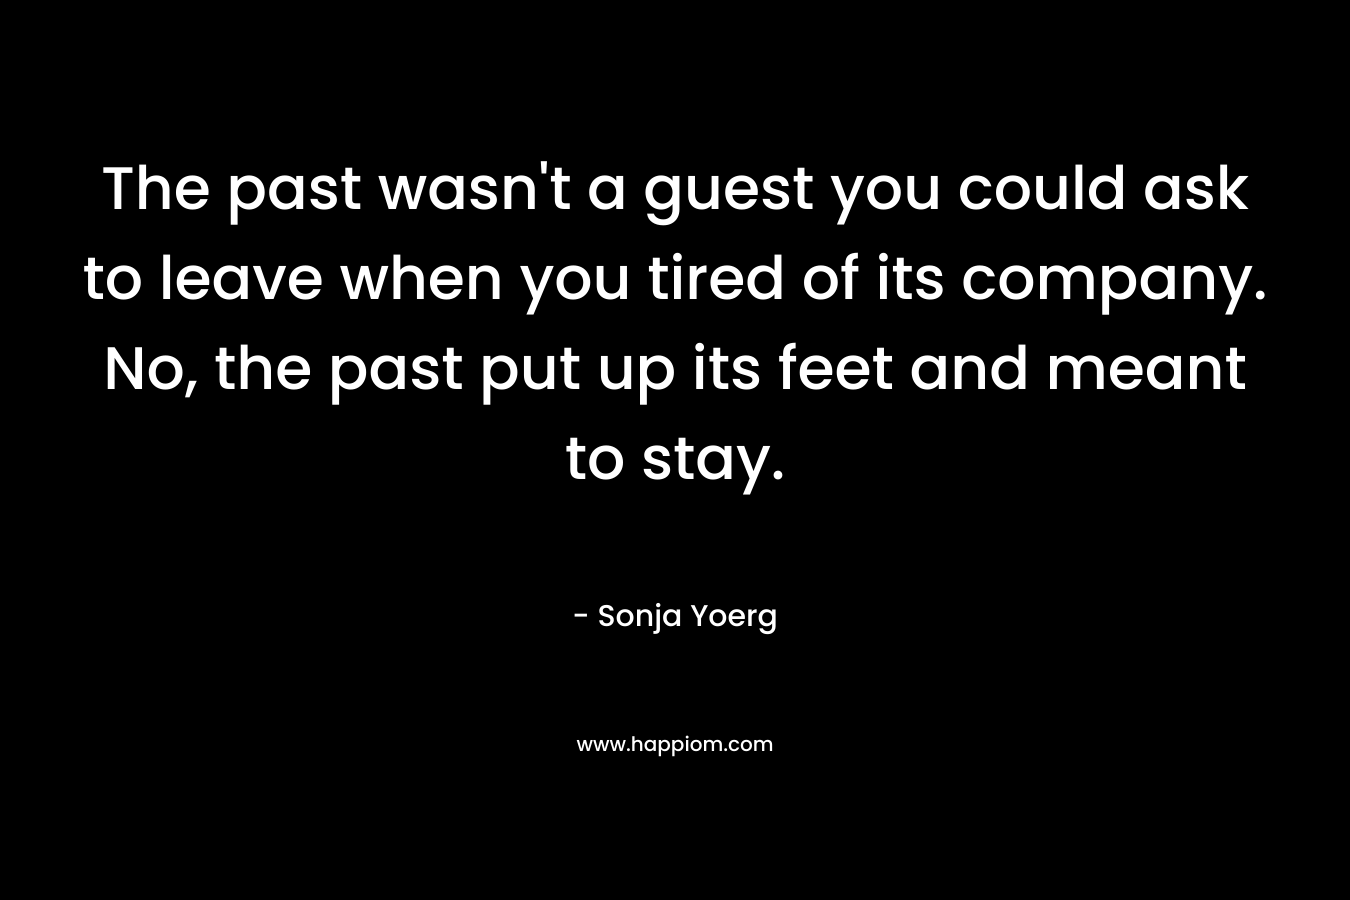 The past wasn’t a guest you could ask to leave when you tired of its company. No, the past put up its feet and meant to stay. – Sonja Yoerg